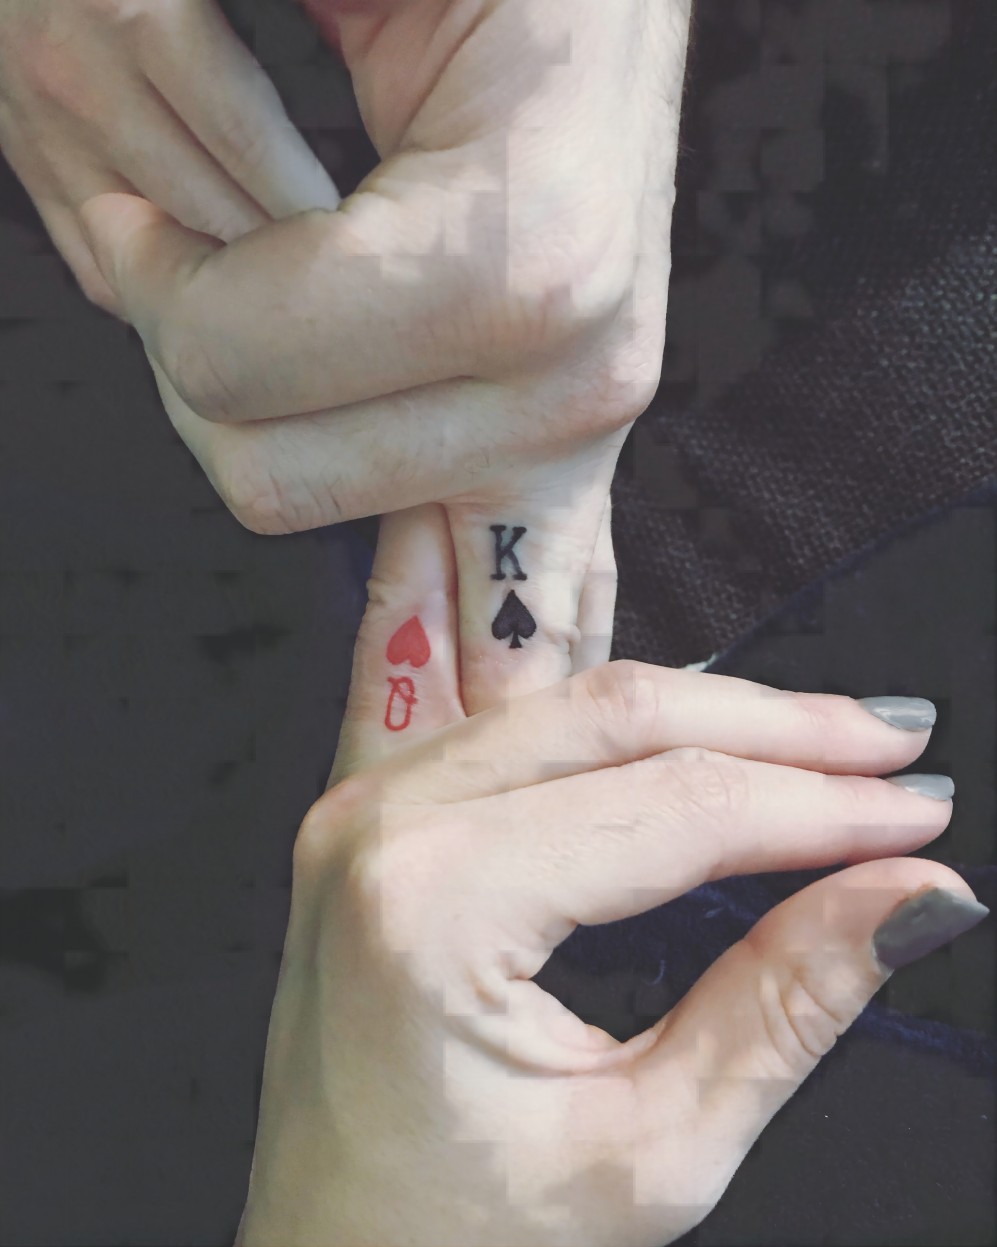 Hearts and Spades soulmate wedding ring tattoos